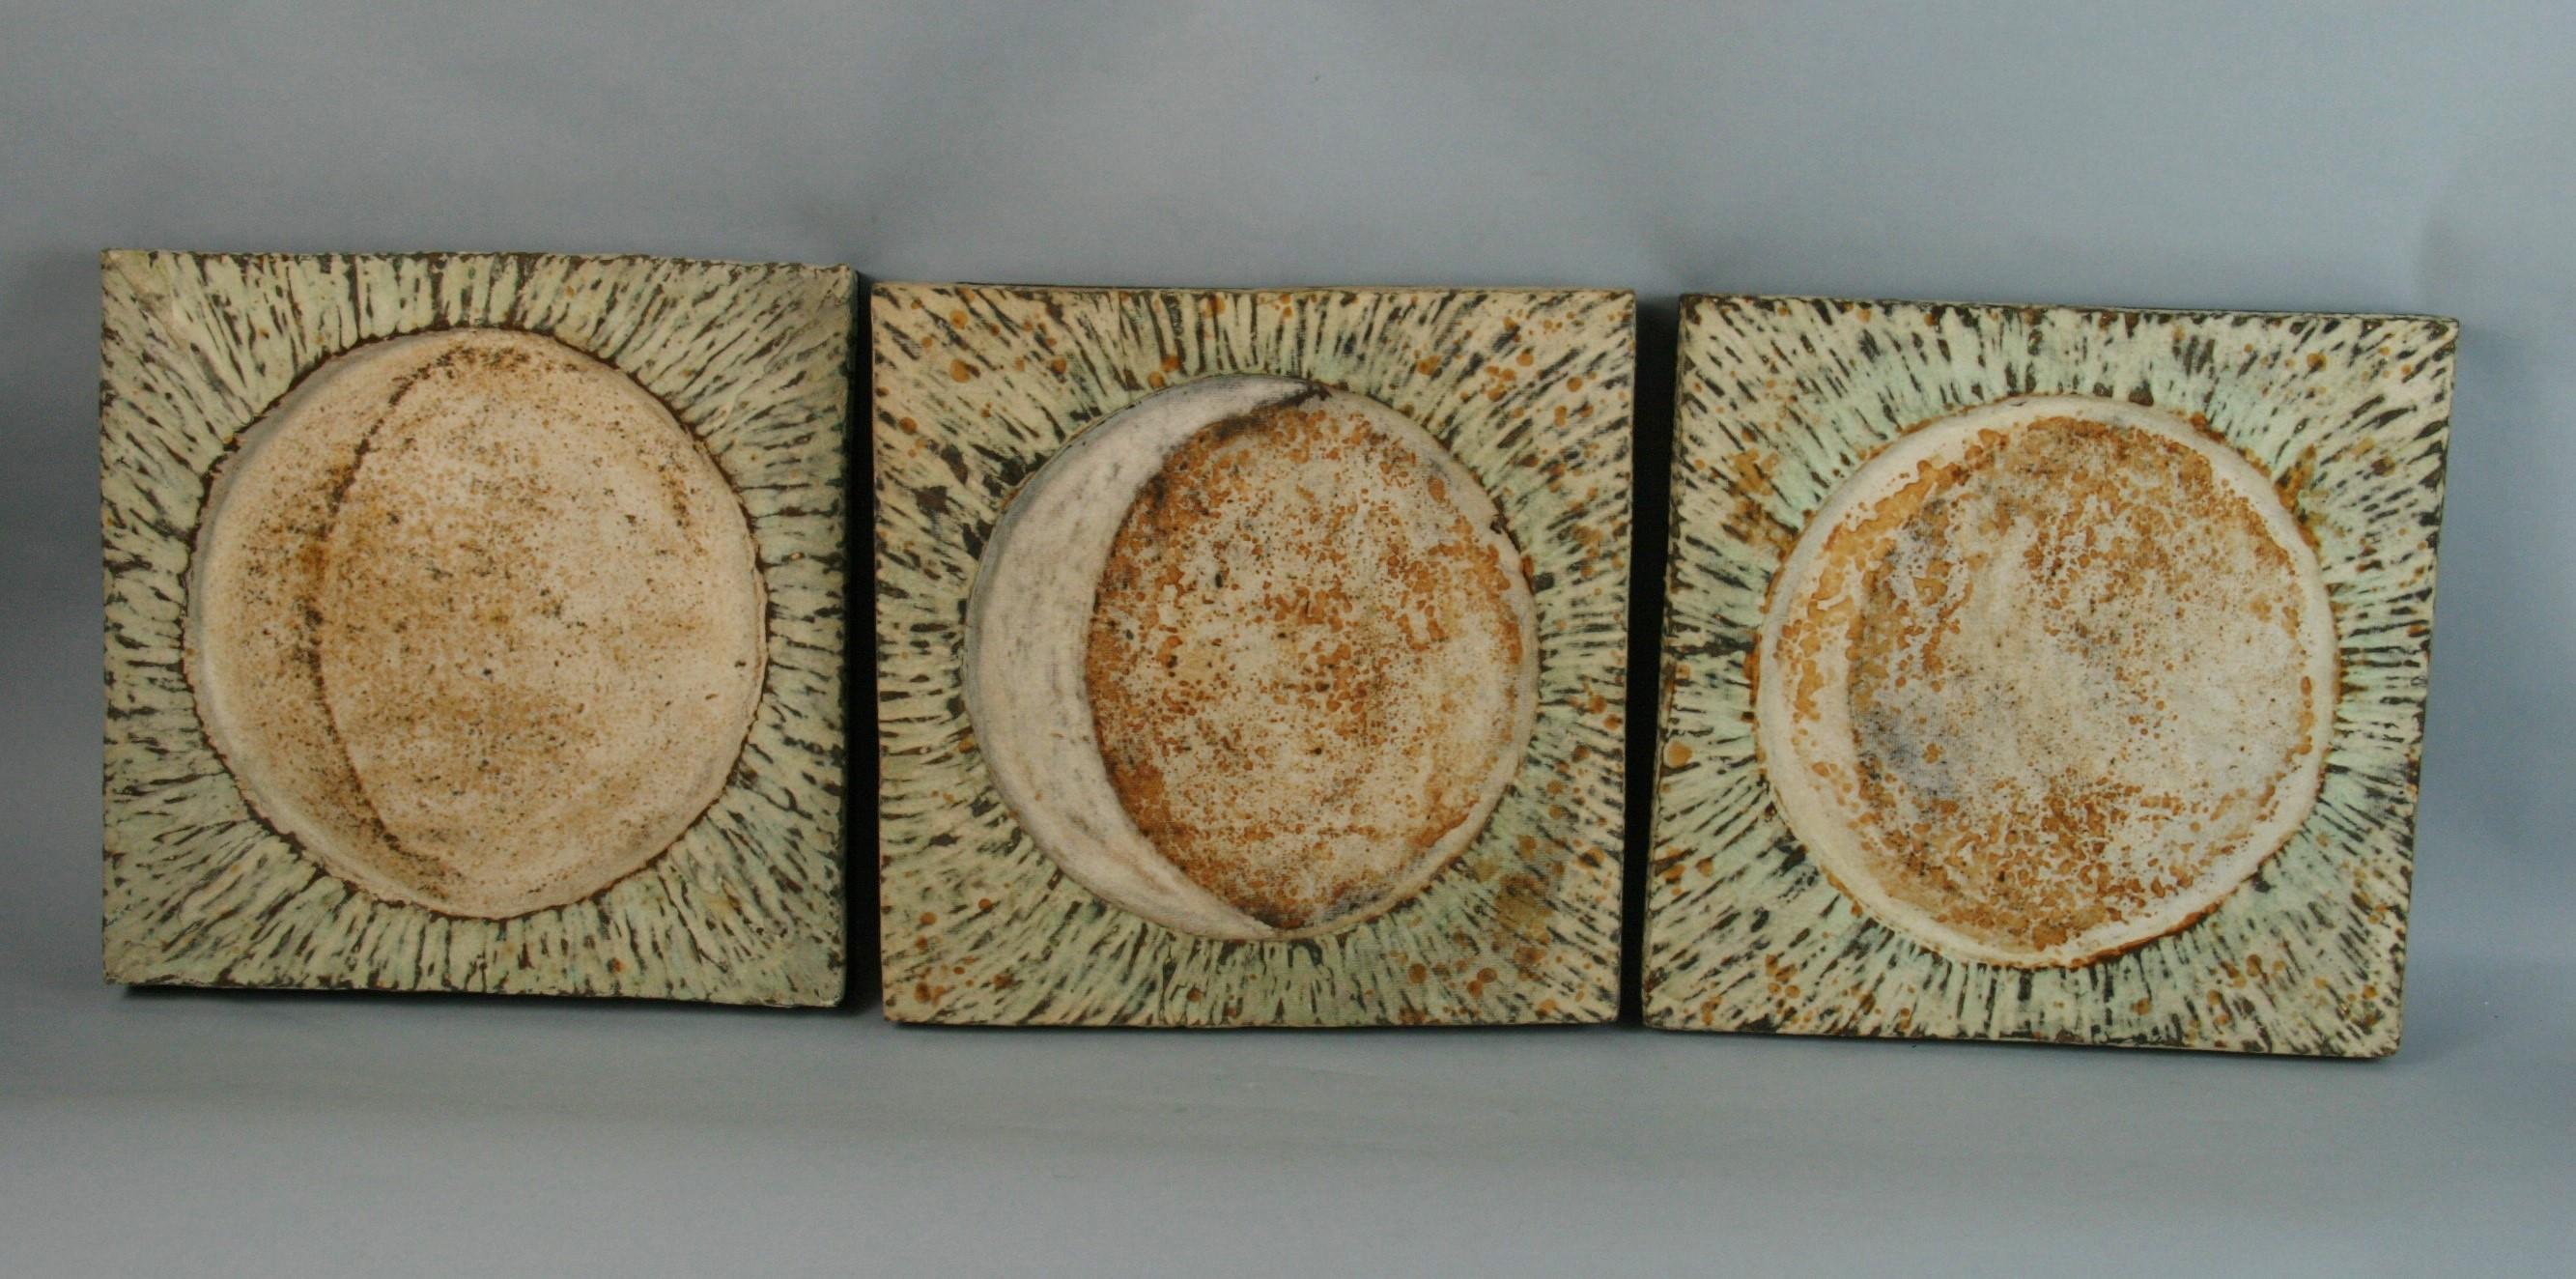 Japanese triptych made from wood surfaced with Japanese hand made paper
each piece 13 x 13 x 1.75 total dimension 39 x 13 x 1.75